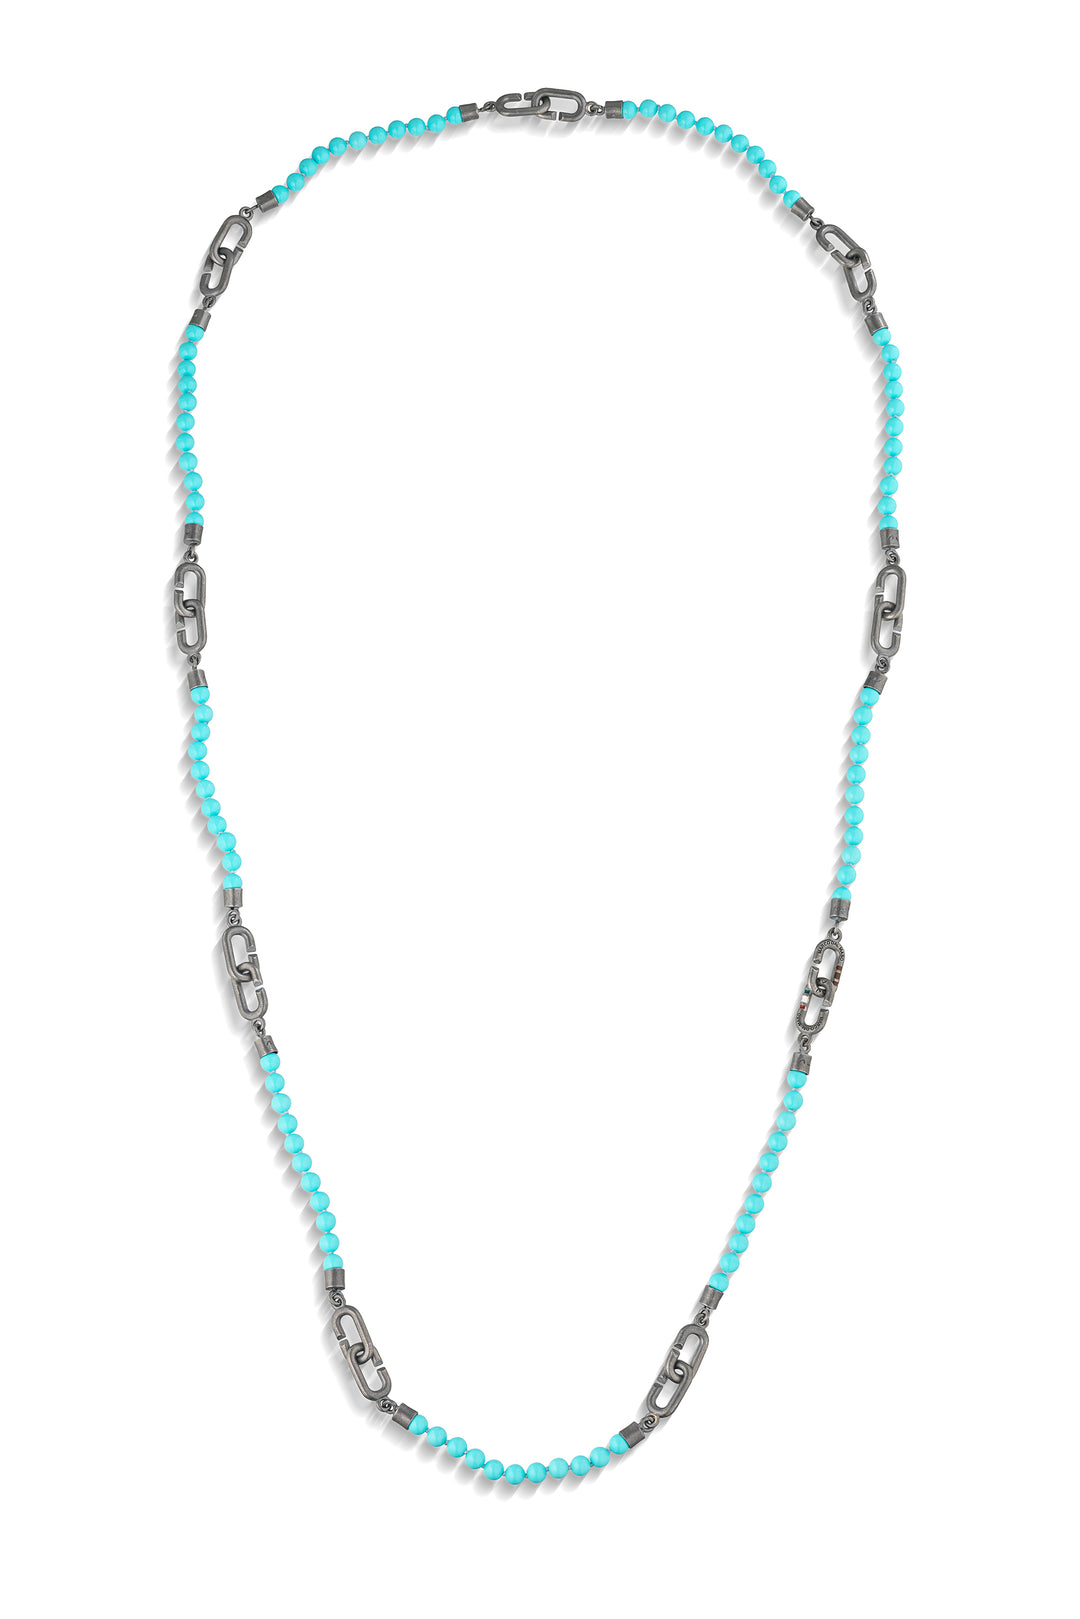 THE LINK Beaded Turquoise Chain